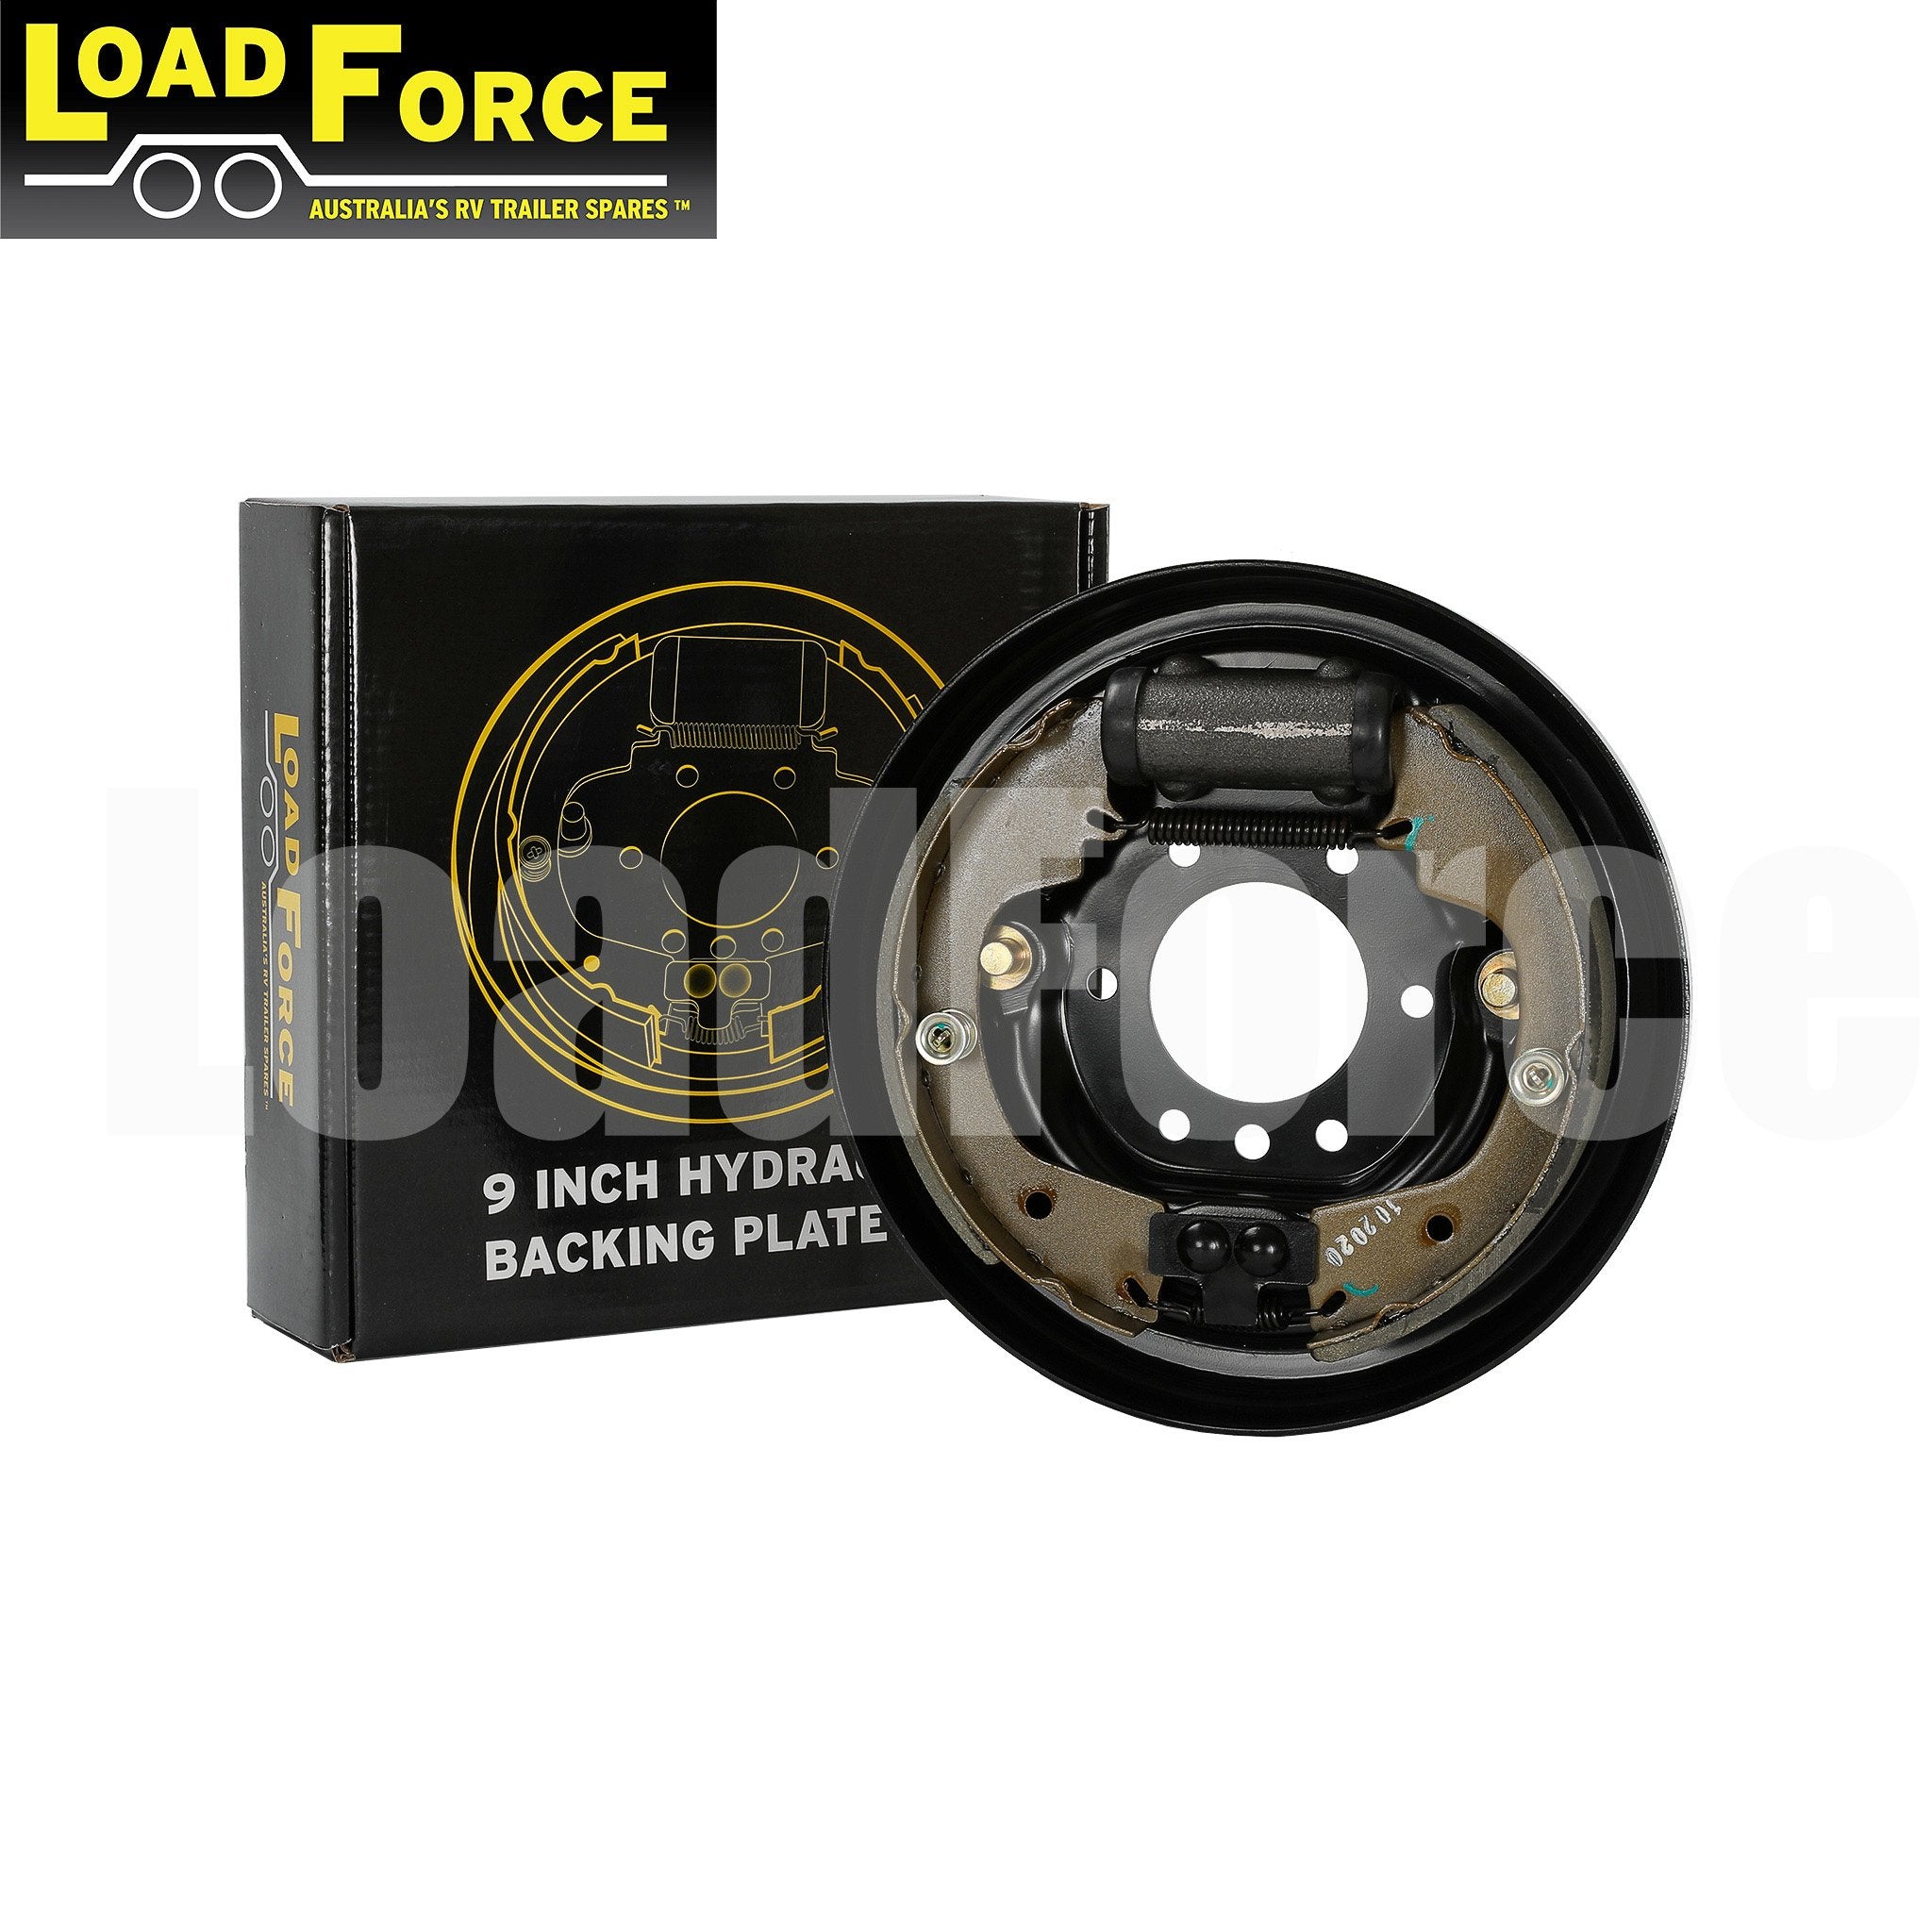 LoadForce 9 inch hydraulic backing plate assembly right hand